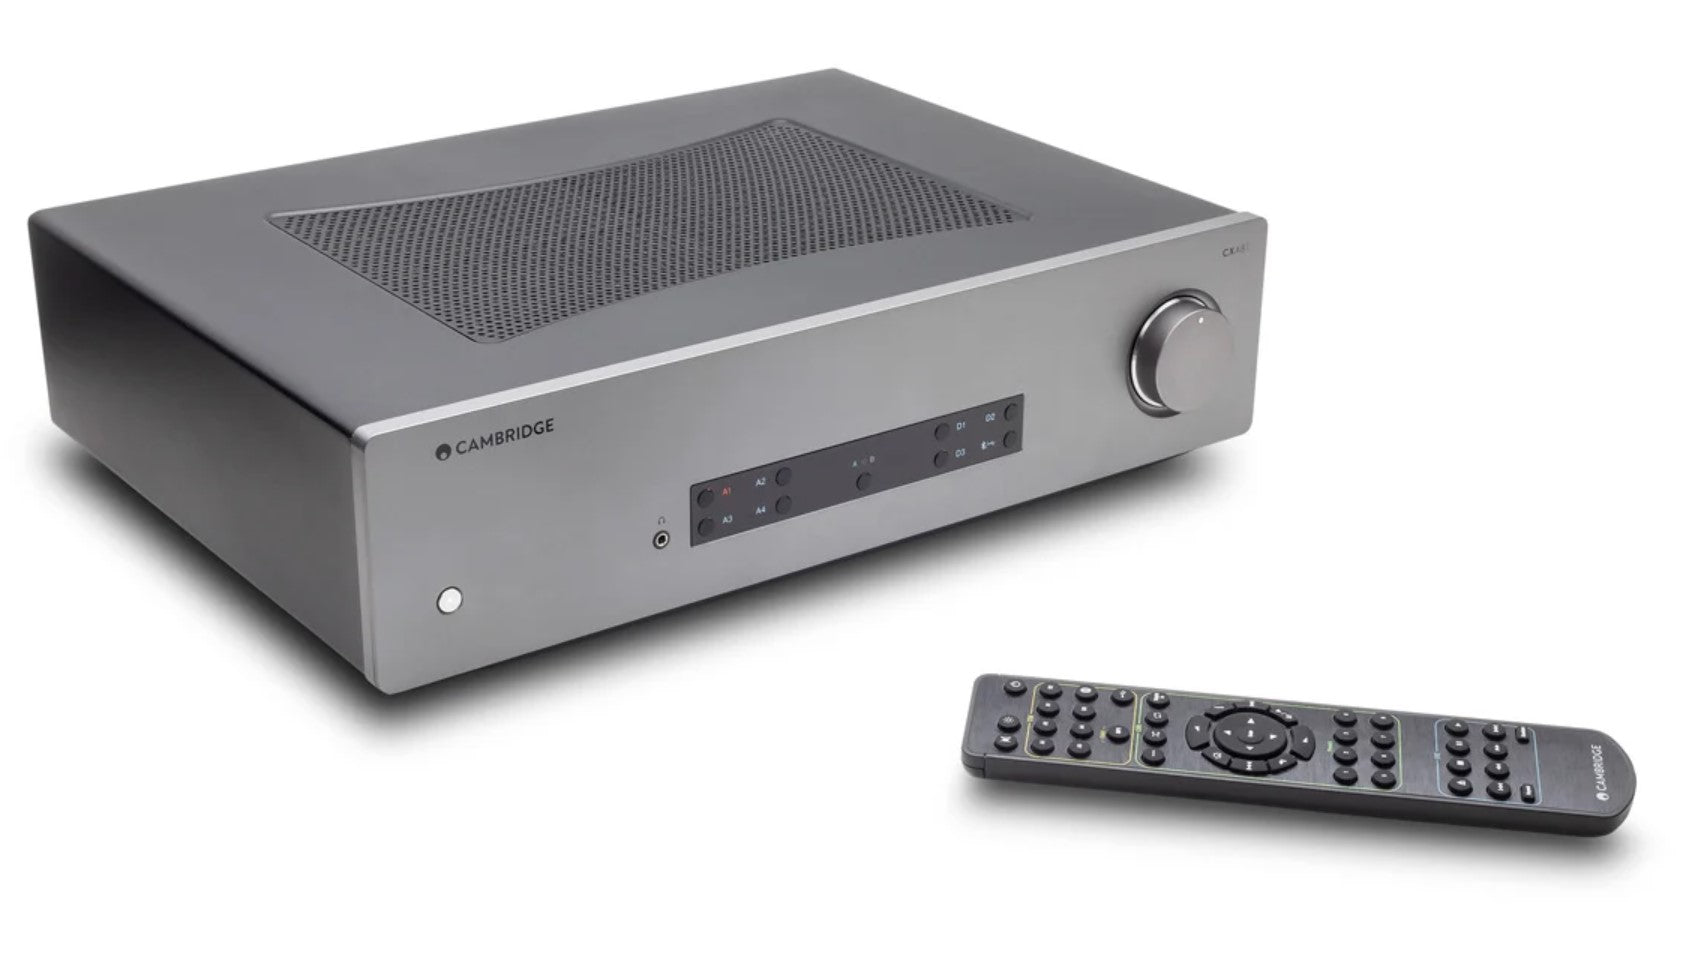 Cambridge Audio CXA81-RB Stereo Two-Channel Amplifier with Bluetooth and Built-in DAC 80 Watts Per Channel Lunar Grey - Certified Refurbished